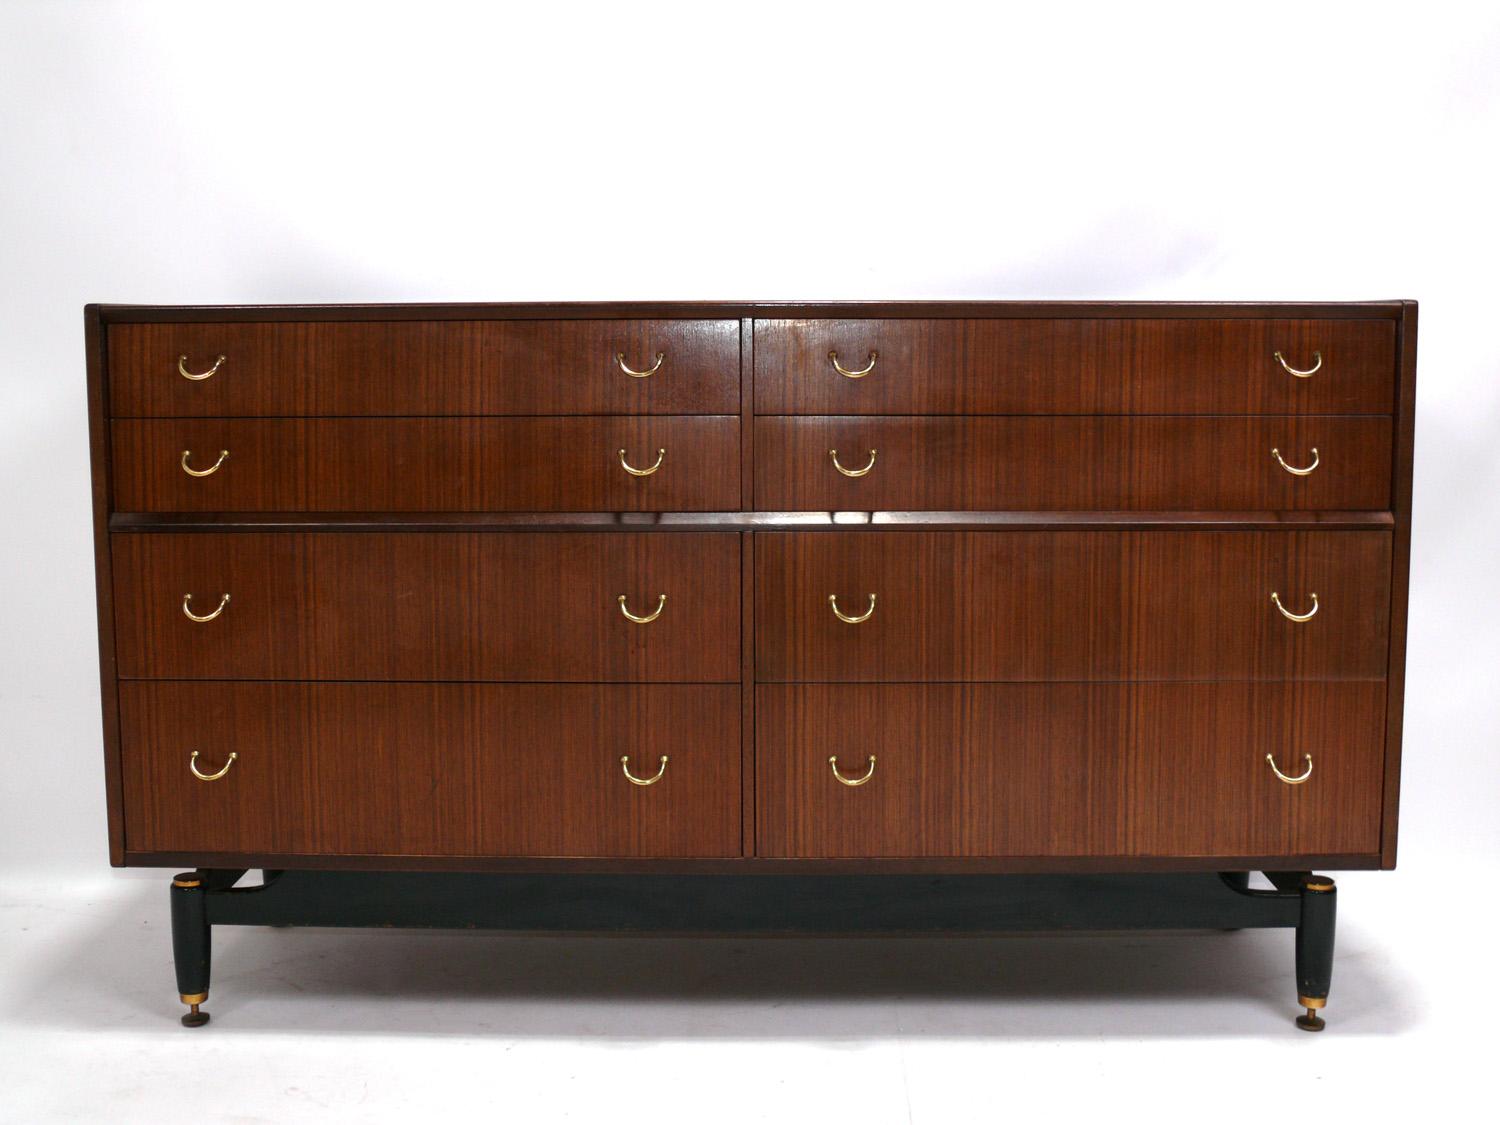 Danish Modern style chest or dresser, made by G Plan Furniture, England, circa 1960s. While located in England, G Plan's designs were clearly influenced by Danish Modern design of the era. This chest offers a voluminous amount of storage with 8